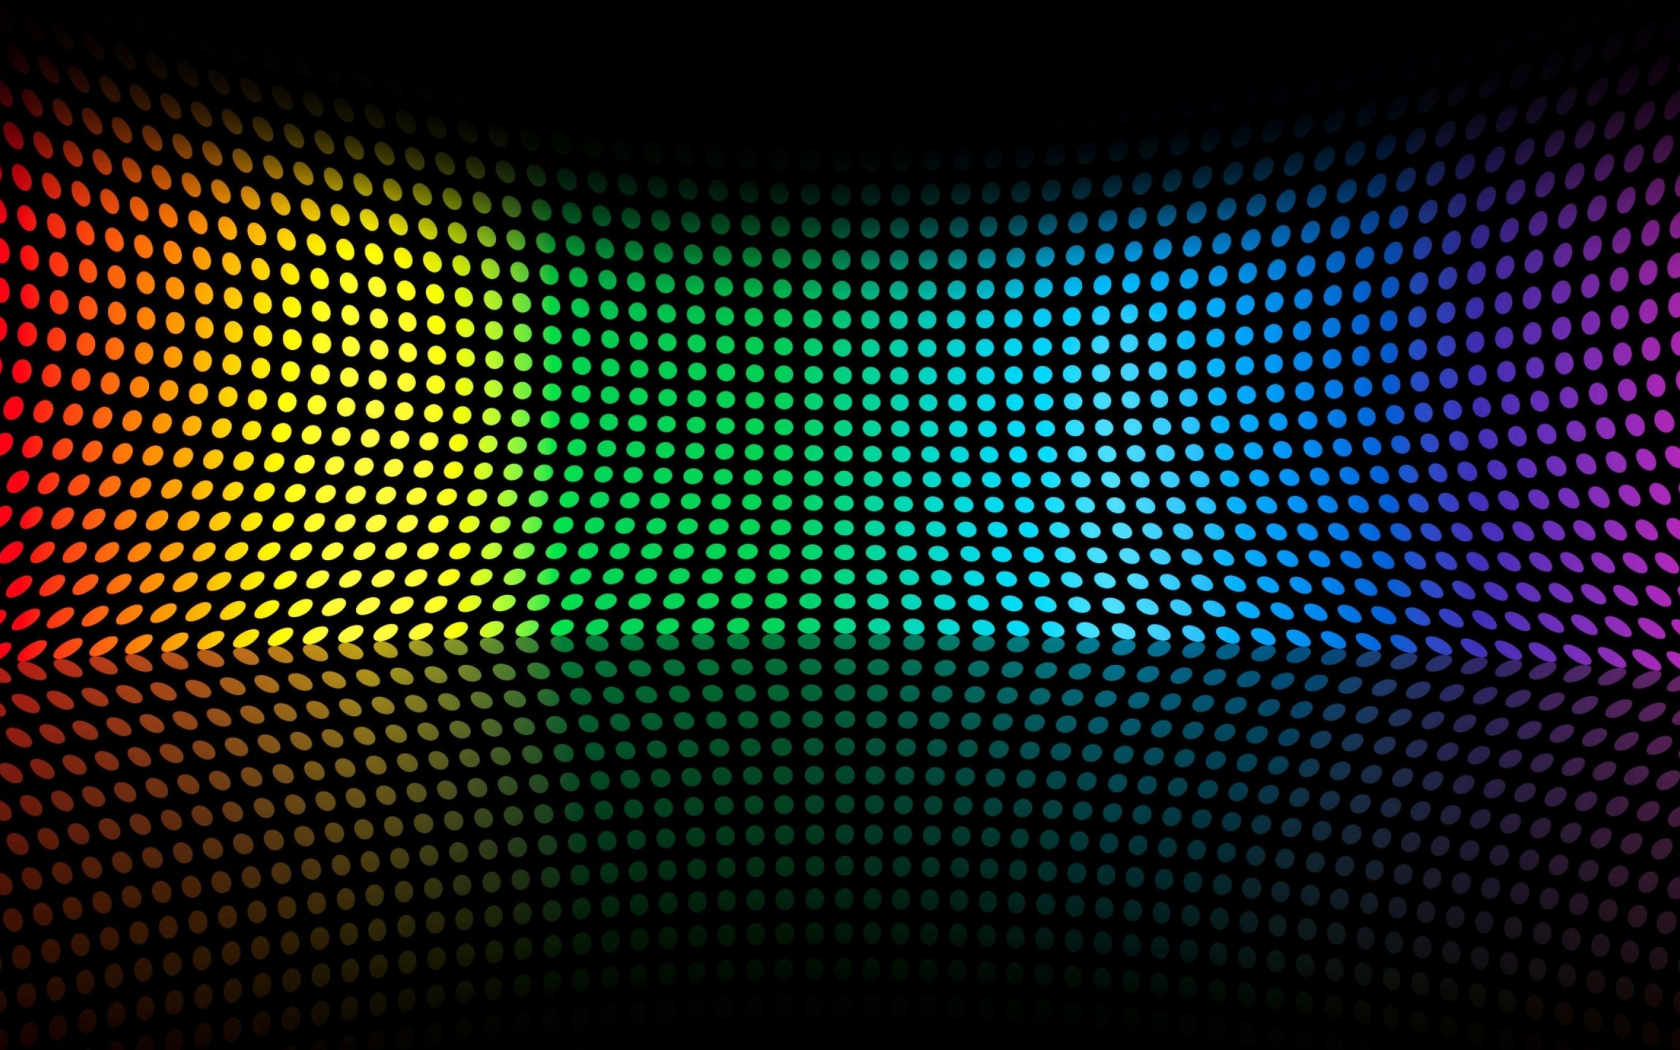 RGB Wall IPhone Wallpaper  IPhone Wallpapers  iPhone Wallpapers  Phone  wallpaper design Simple phone wallpapers Iphone lockscreen wallpaper